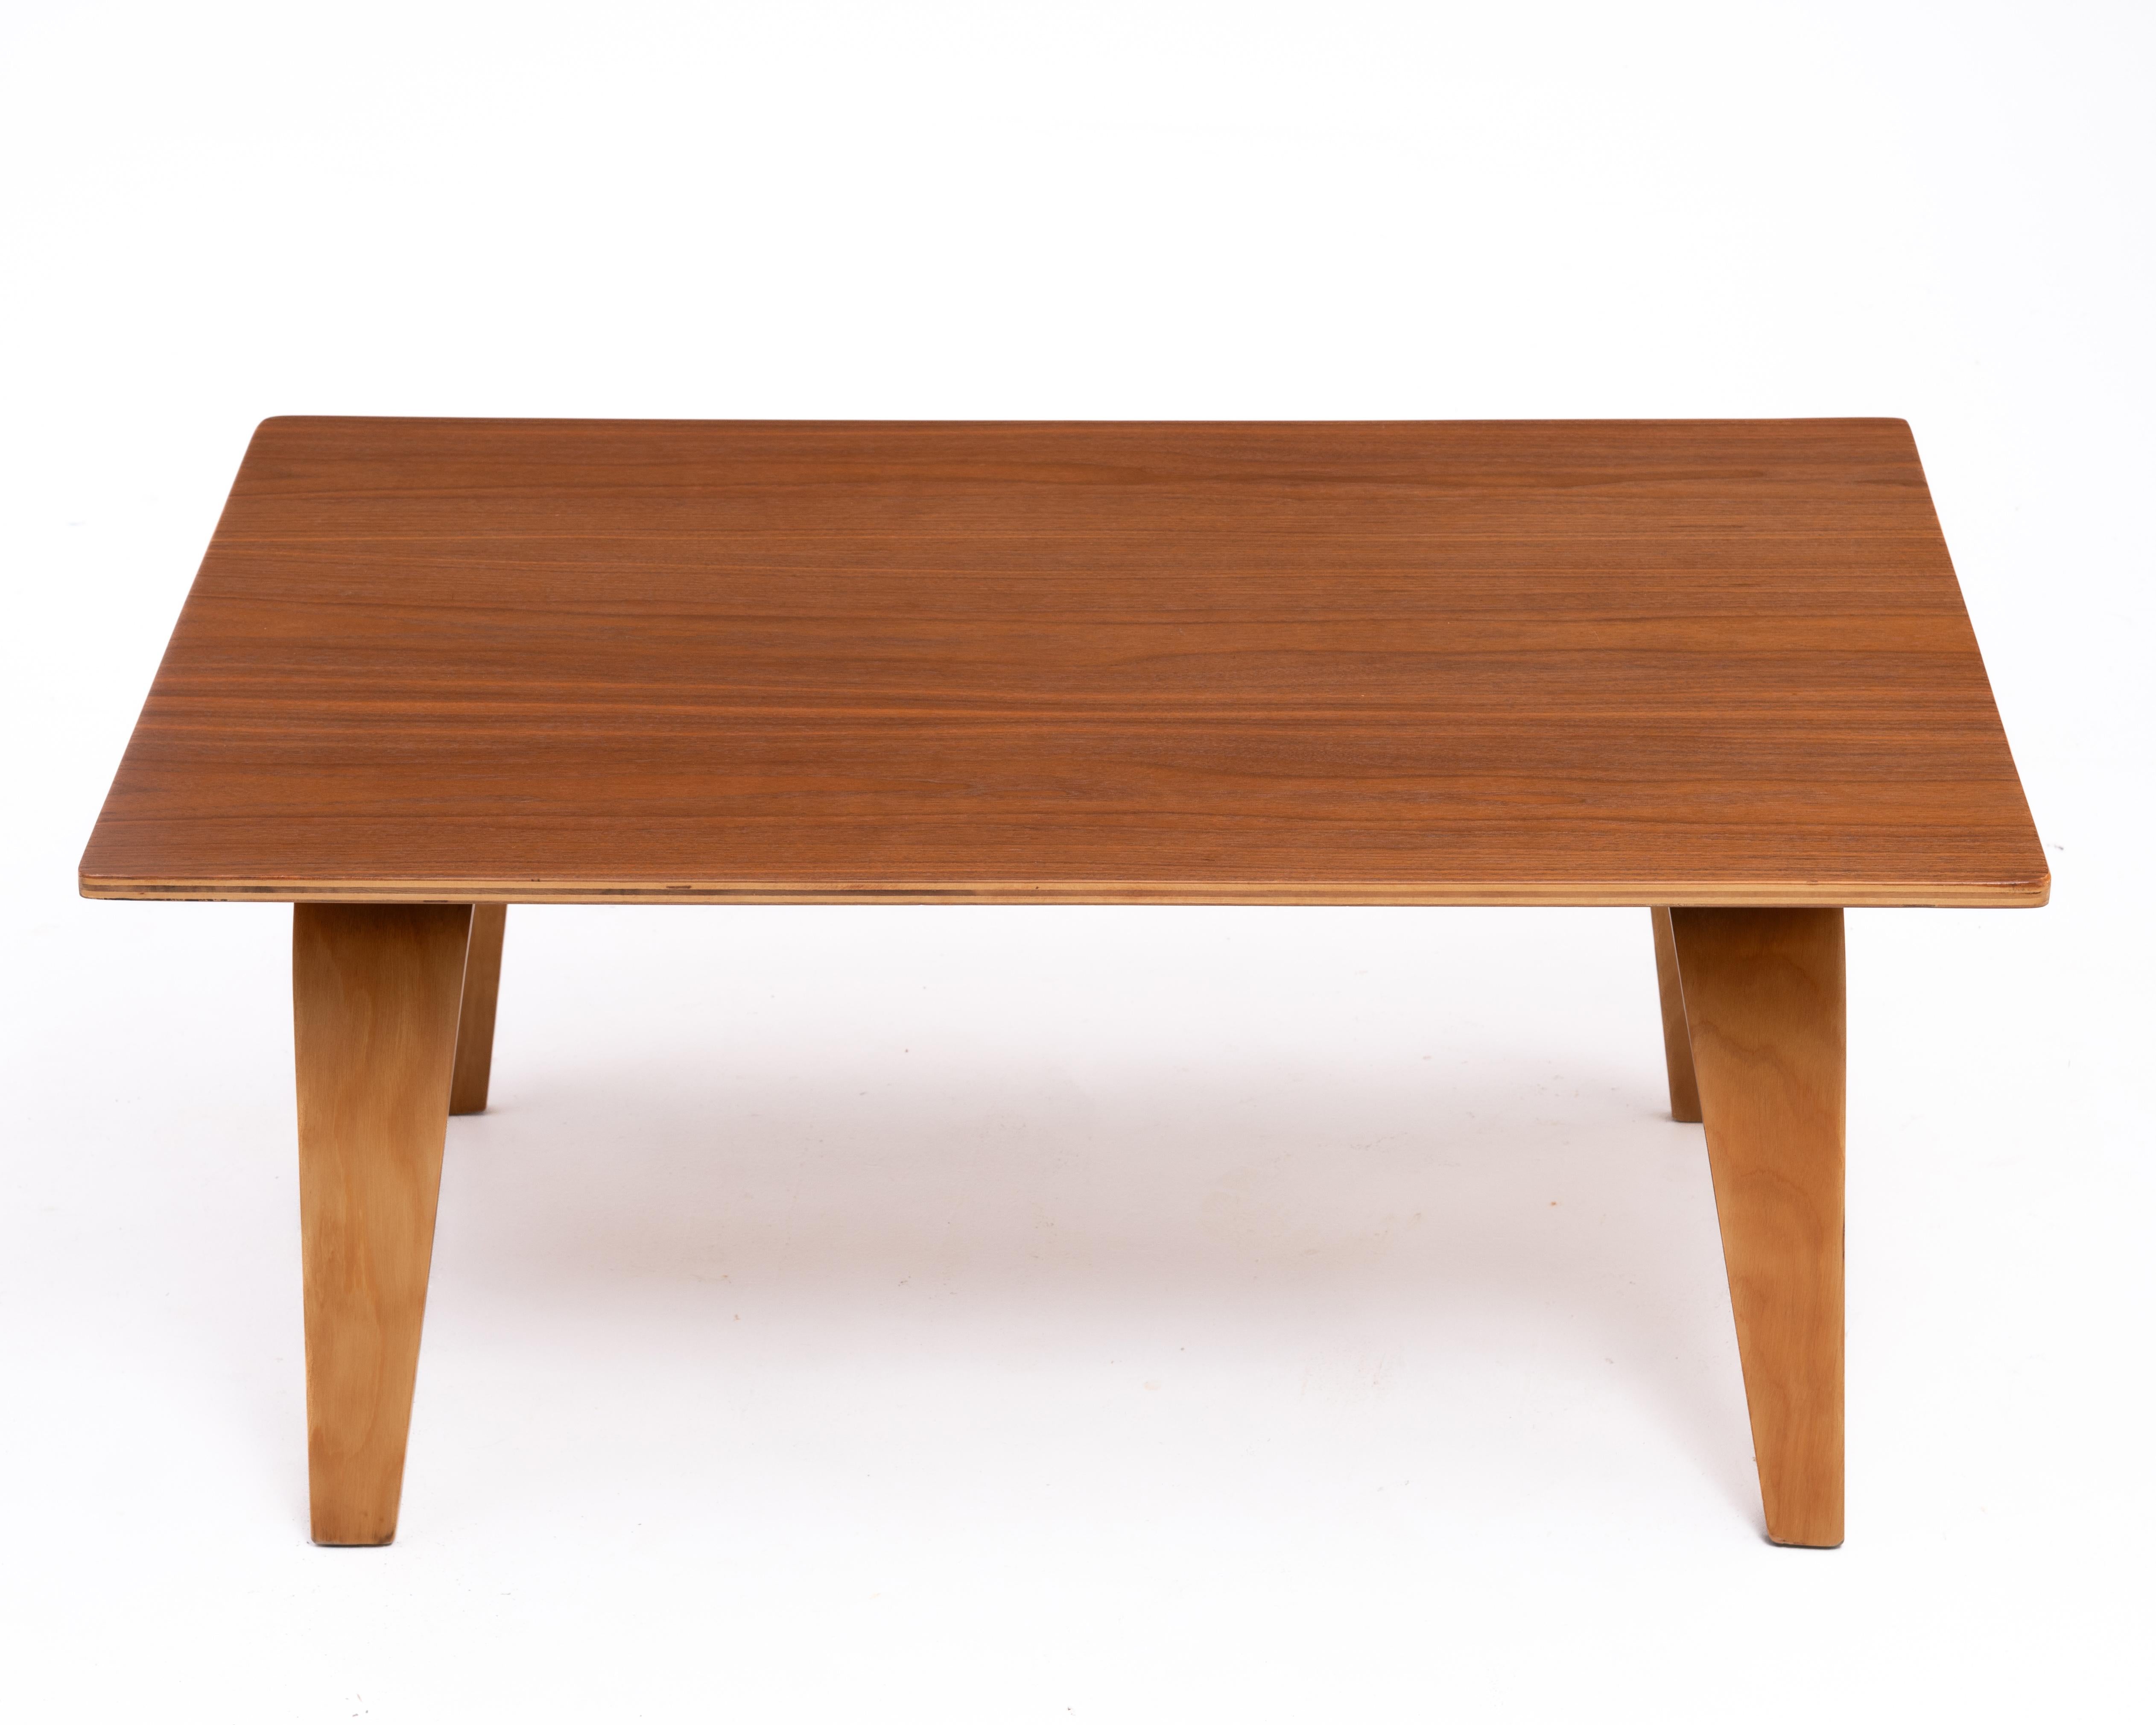 Charles Ray Eames Evans Plywood Company CTW1 OTW Oblong Table Wood Walnut Birch For Sale 2